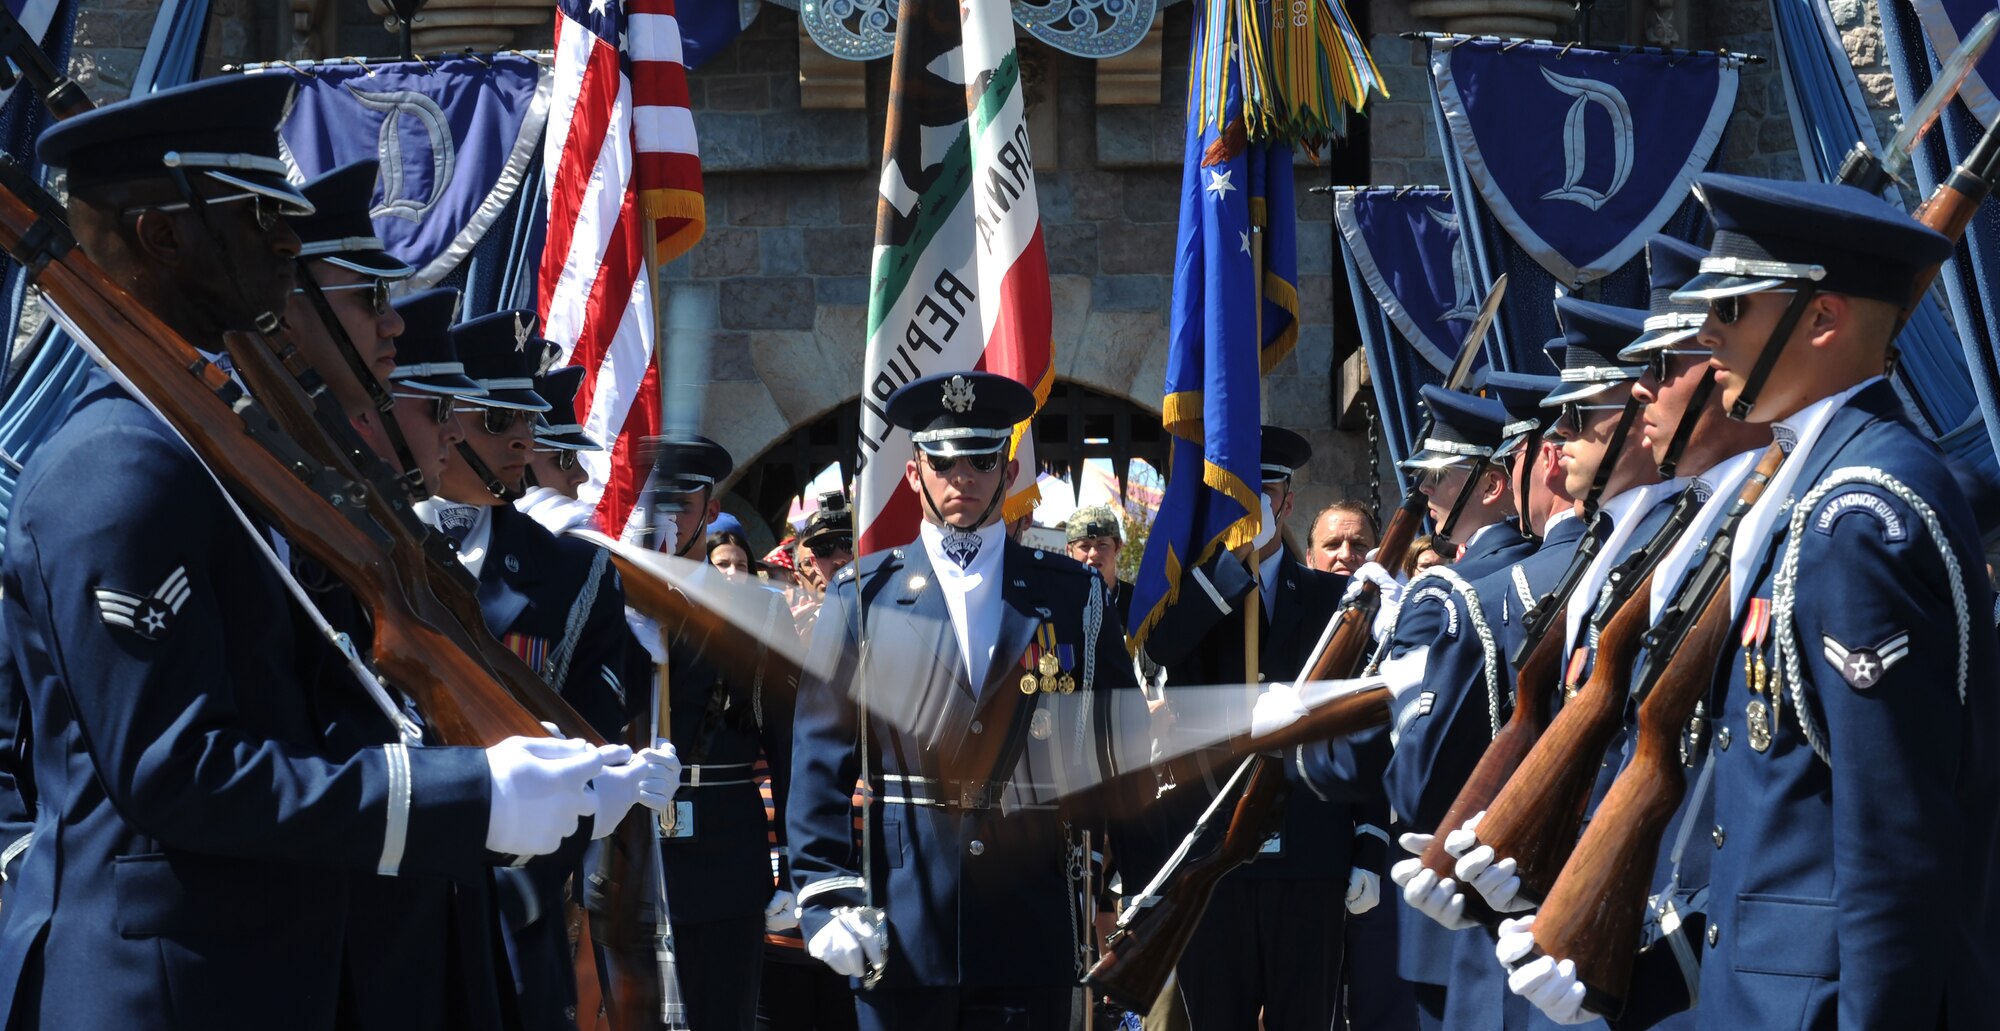 The United States Air Force Honor Guard performs in front of the Disney castle at Disneyland Resort in Anaheim, Calif., July 2, 2015. The Honor Guard is participating in several performances daily throughout the Fourth of July weekend. (U.S. Air Force photo/Staff Sgt. Nichelle Anderson)